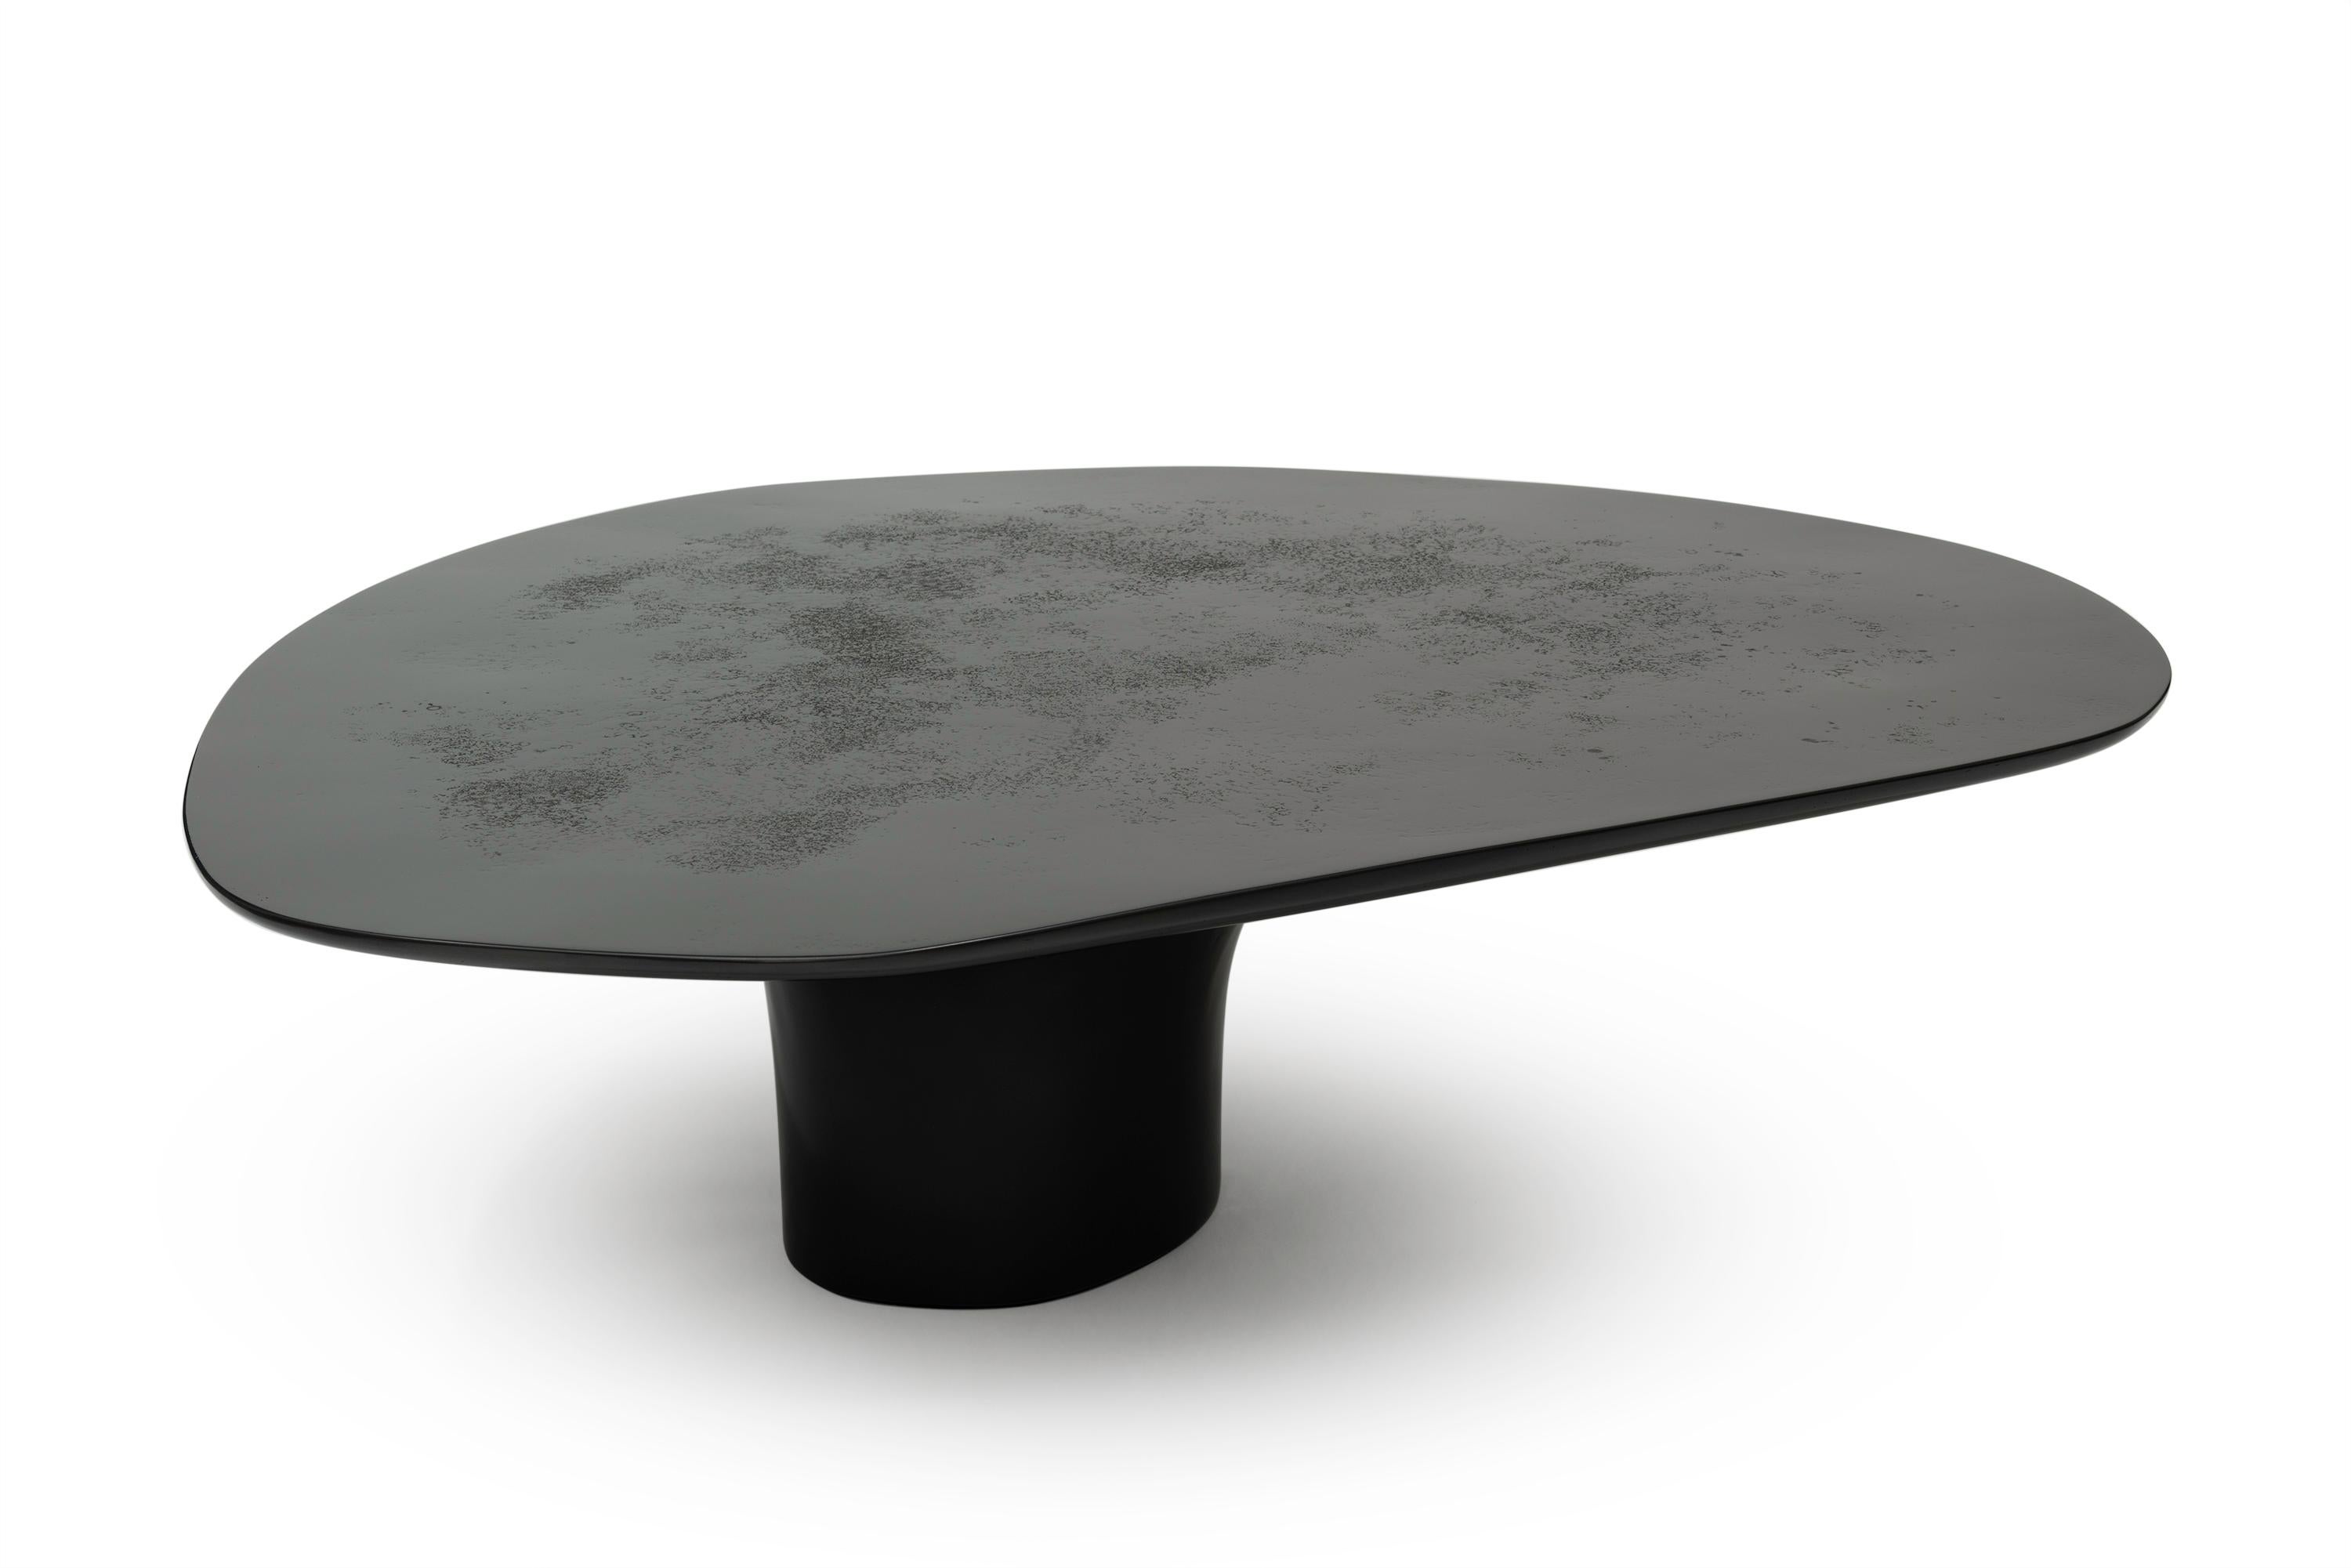 NR black smooth - 21st century contemporary sculptural circular black coffee table

The highly edge intuitively shaped low table possess the touch of lack of gravity. The tabletop and base constitution convey the impression being a contradiction